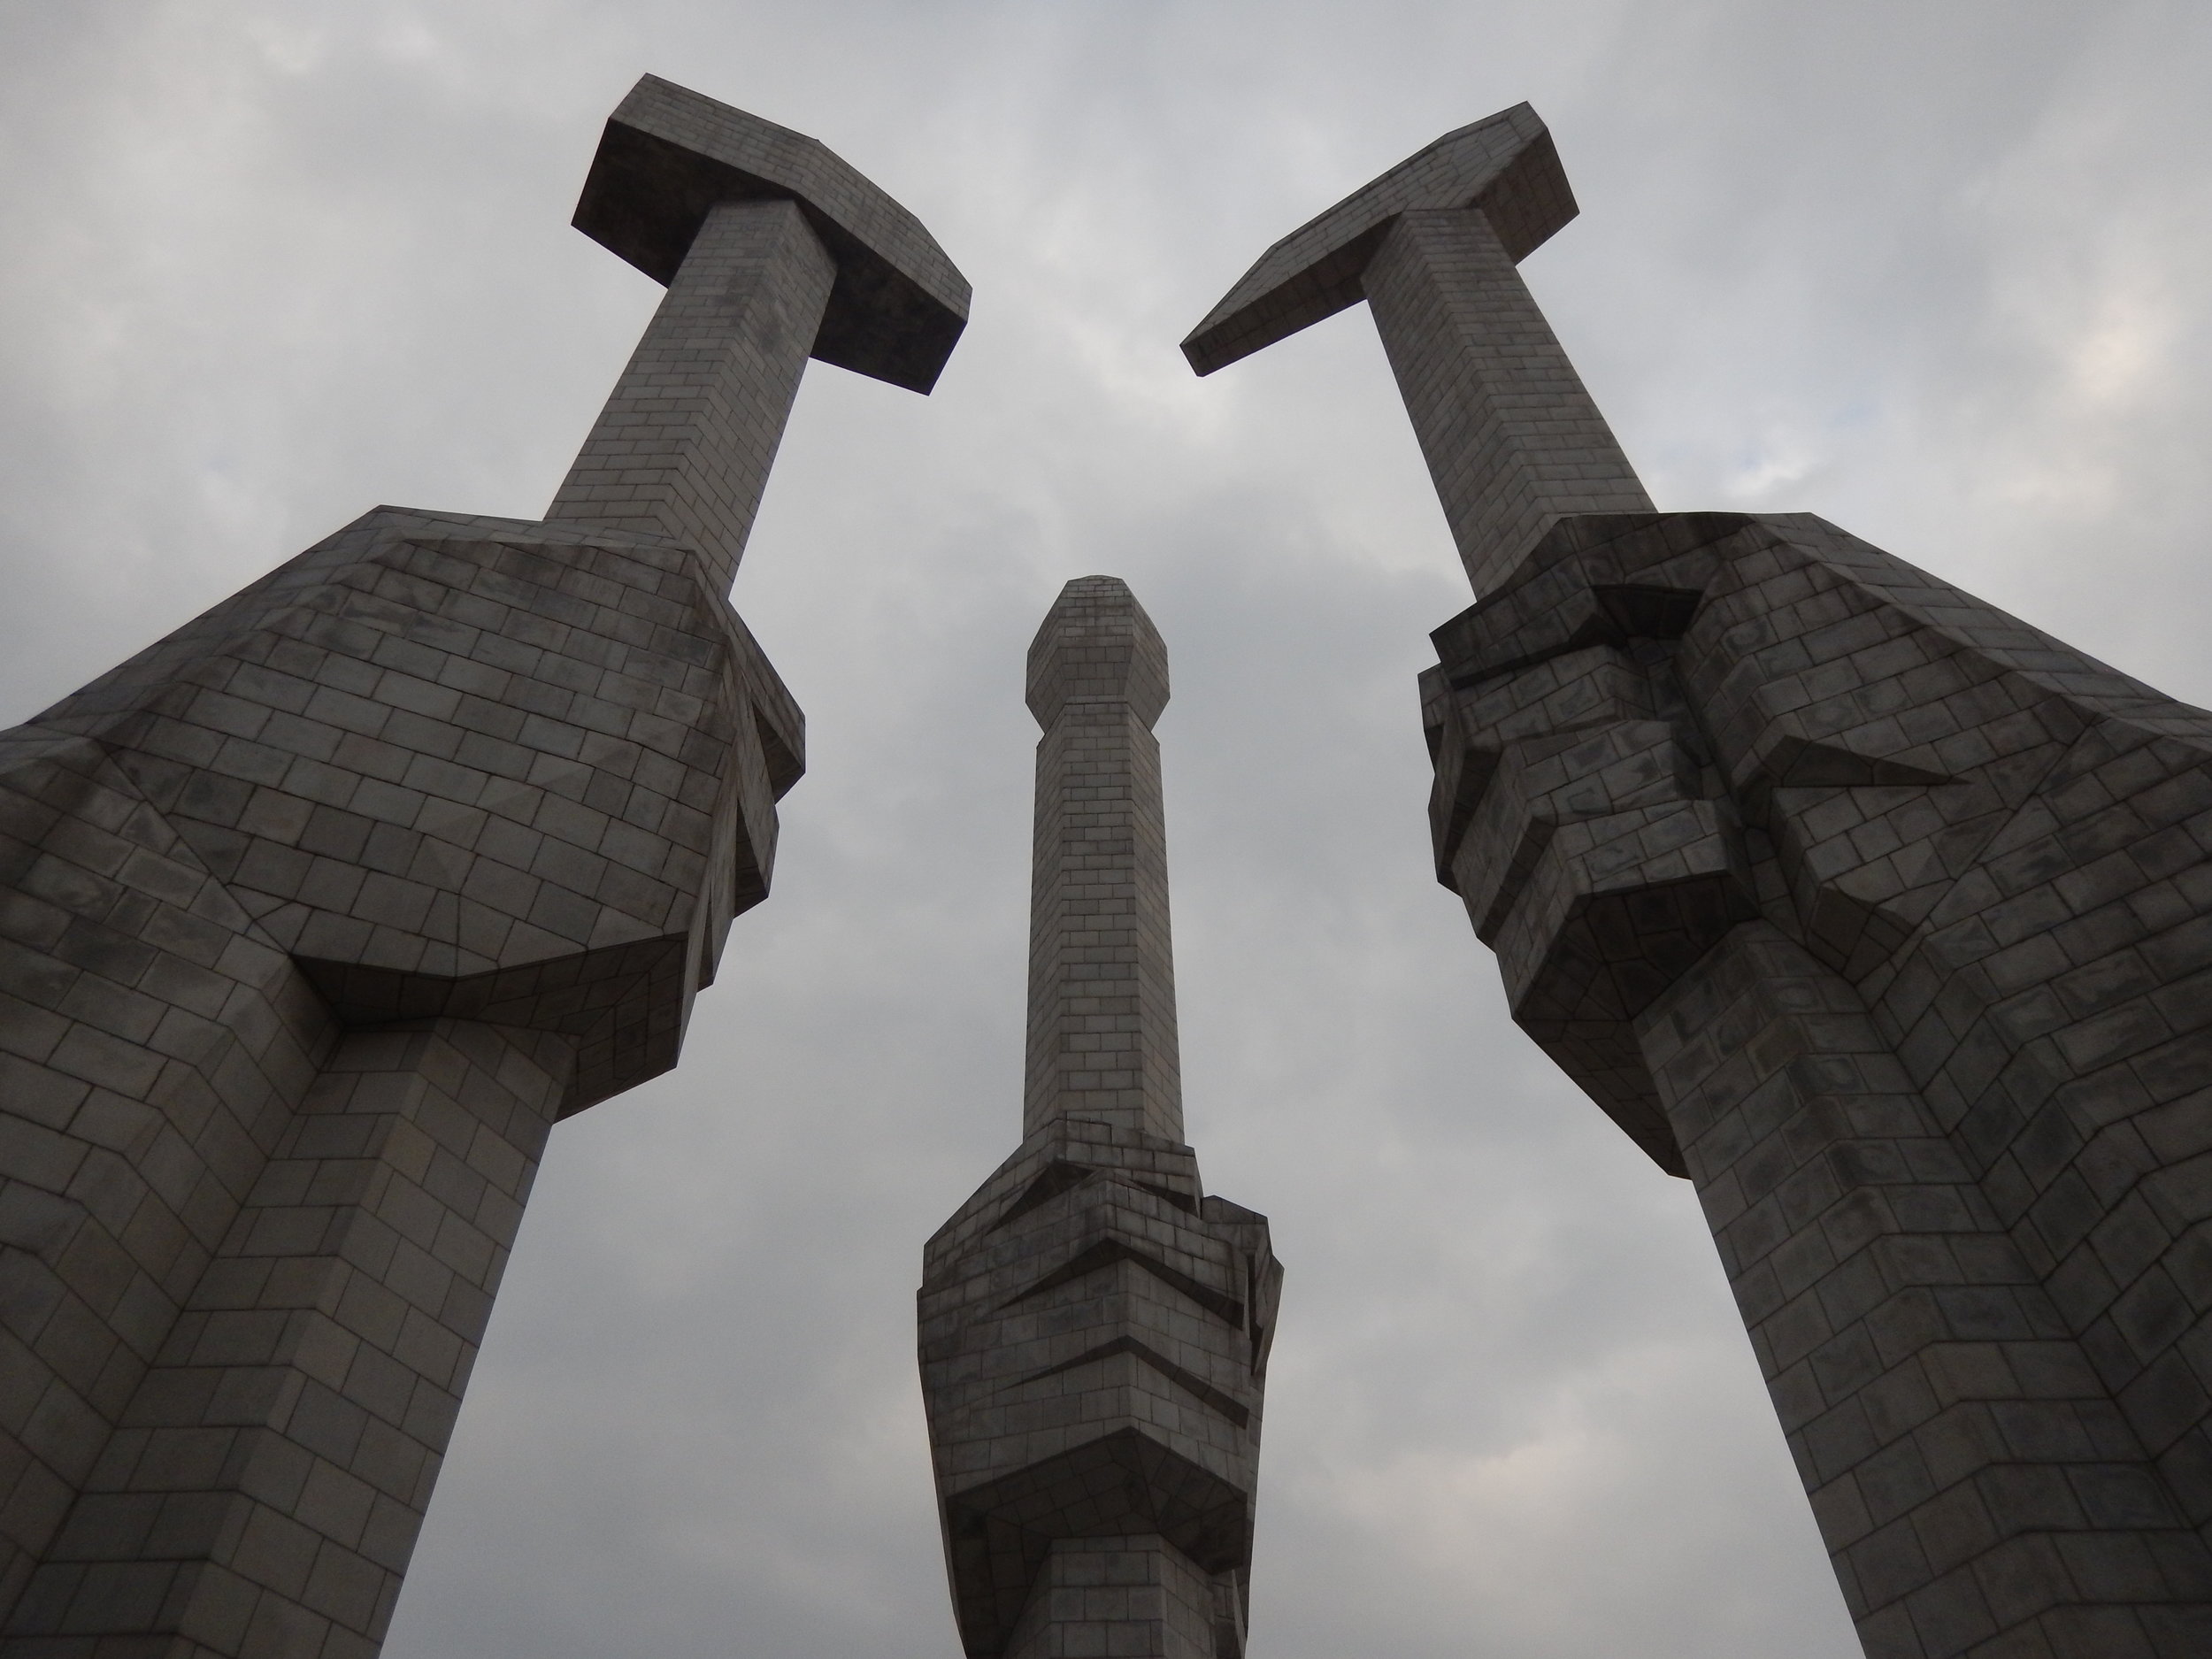  The Monument to the Foundation of the Party features three hands holding a hammer, representing the worker, a sickle, representing the farmer, and a paintbrush, representing the intellectual – these three tools are the official symbols of the ruling Worker's Party of Korea. (Photo by Ethan Jakob Craft.) 